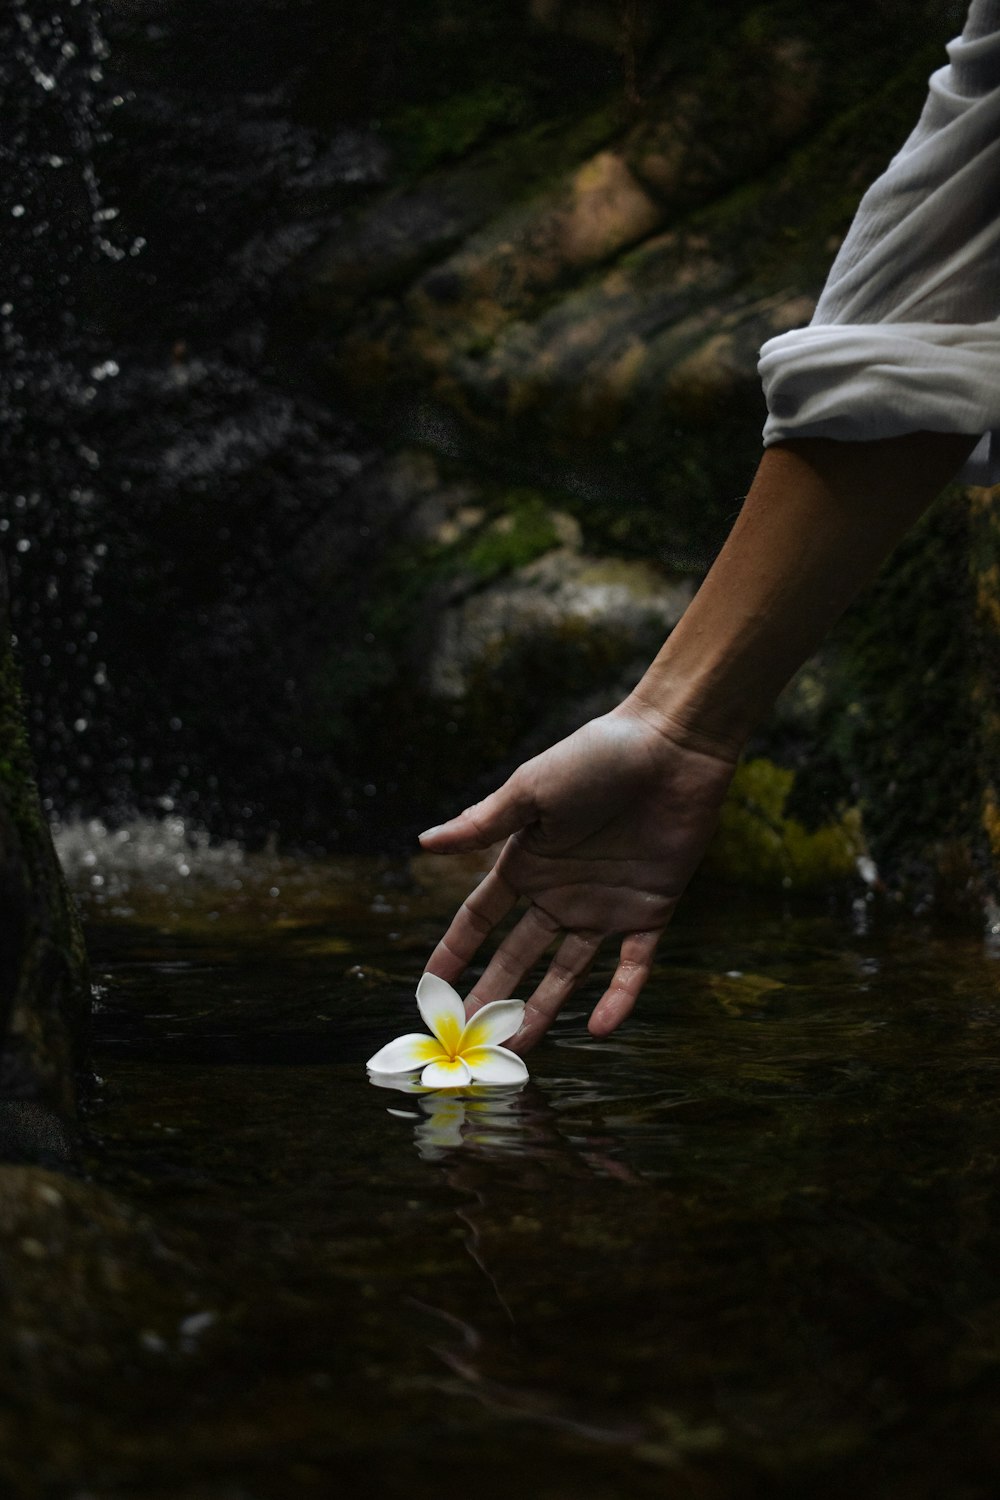 a person reaching for a flower in the water